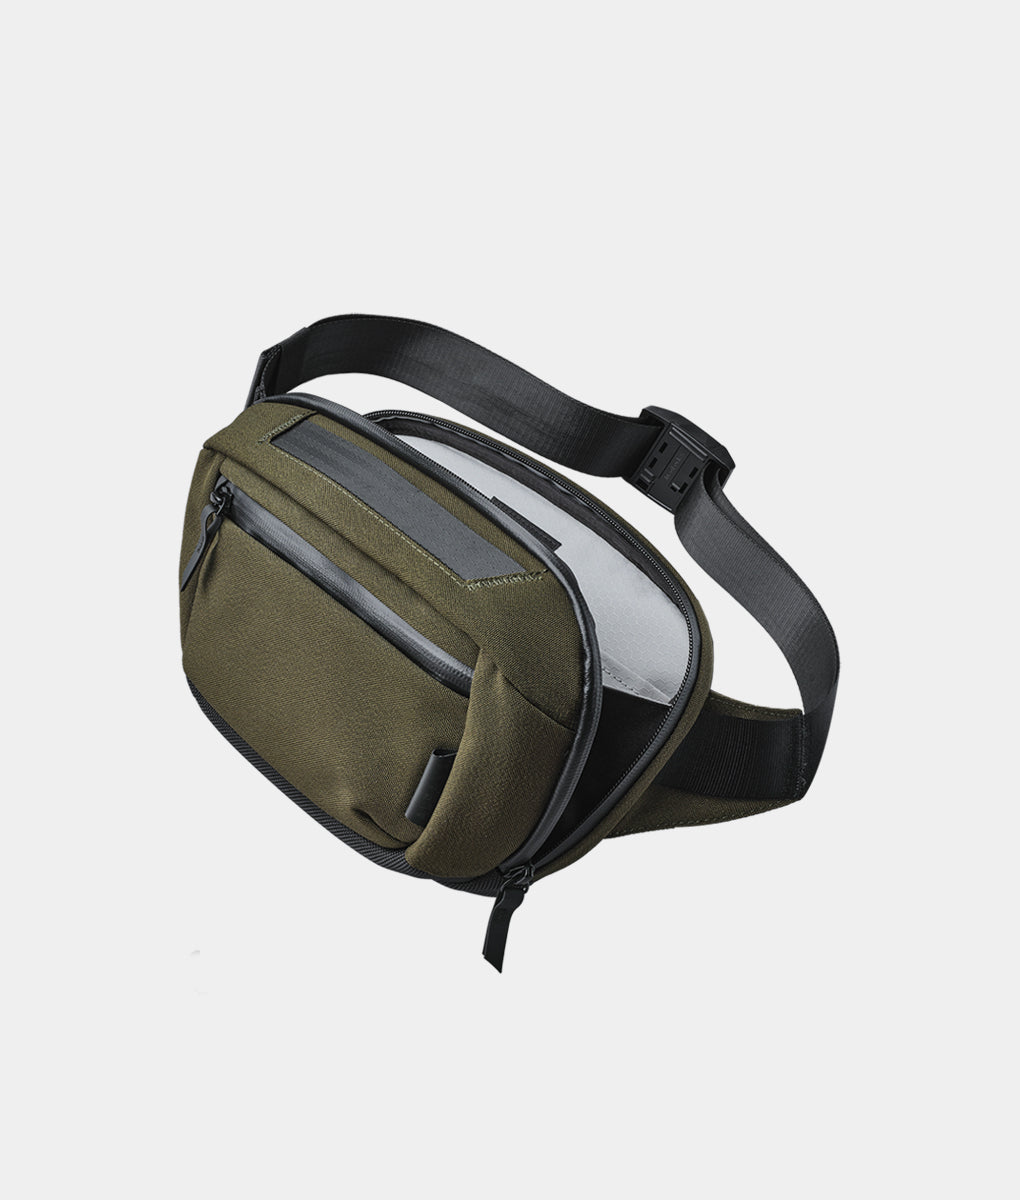 The Best Fanny Packs: Recycled, Waterproof, and More | WIRED